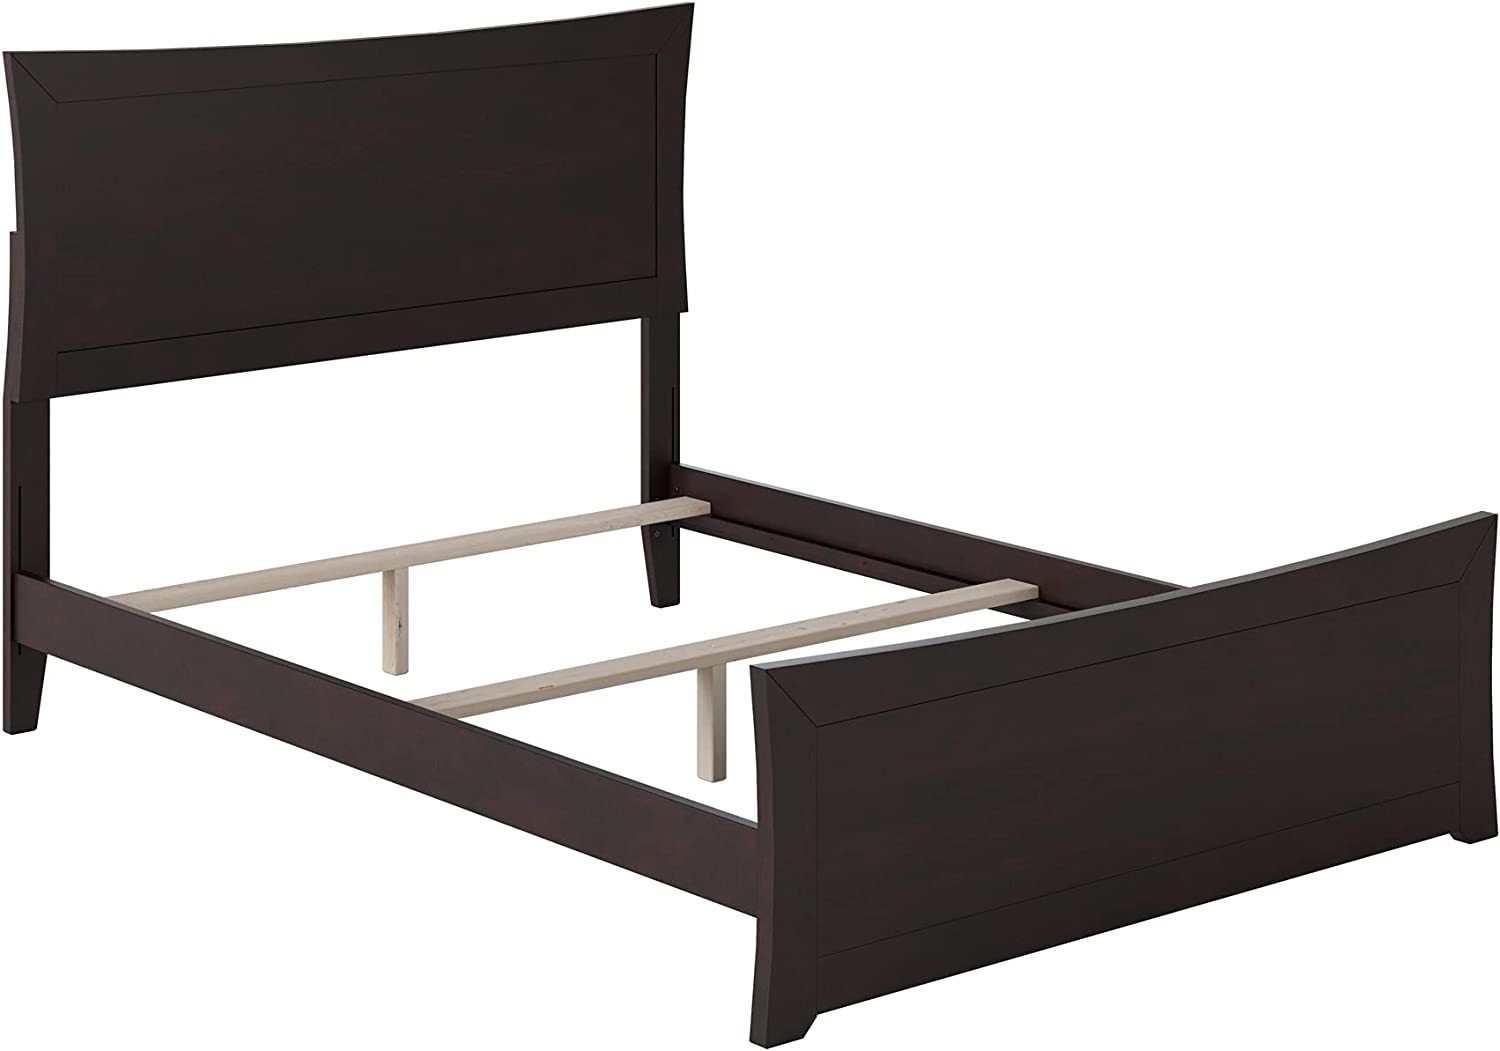 Primary image for Afi Metro Traditional Bed With Matching Footboard And Turbo Charger,, Espresso